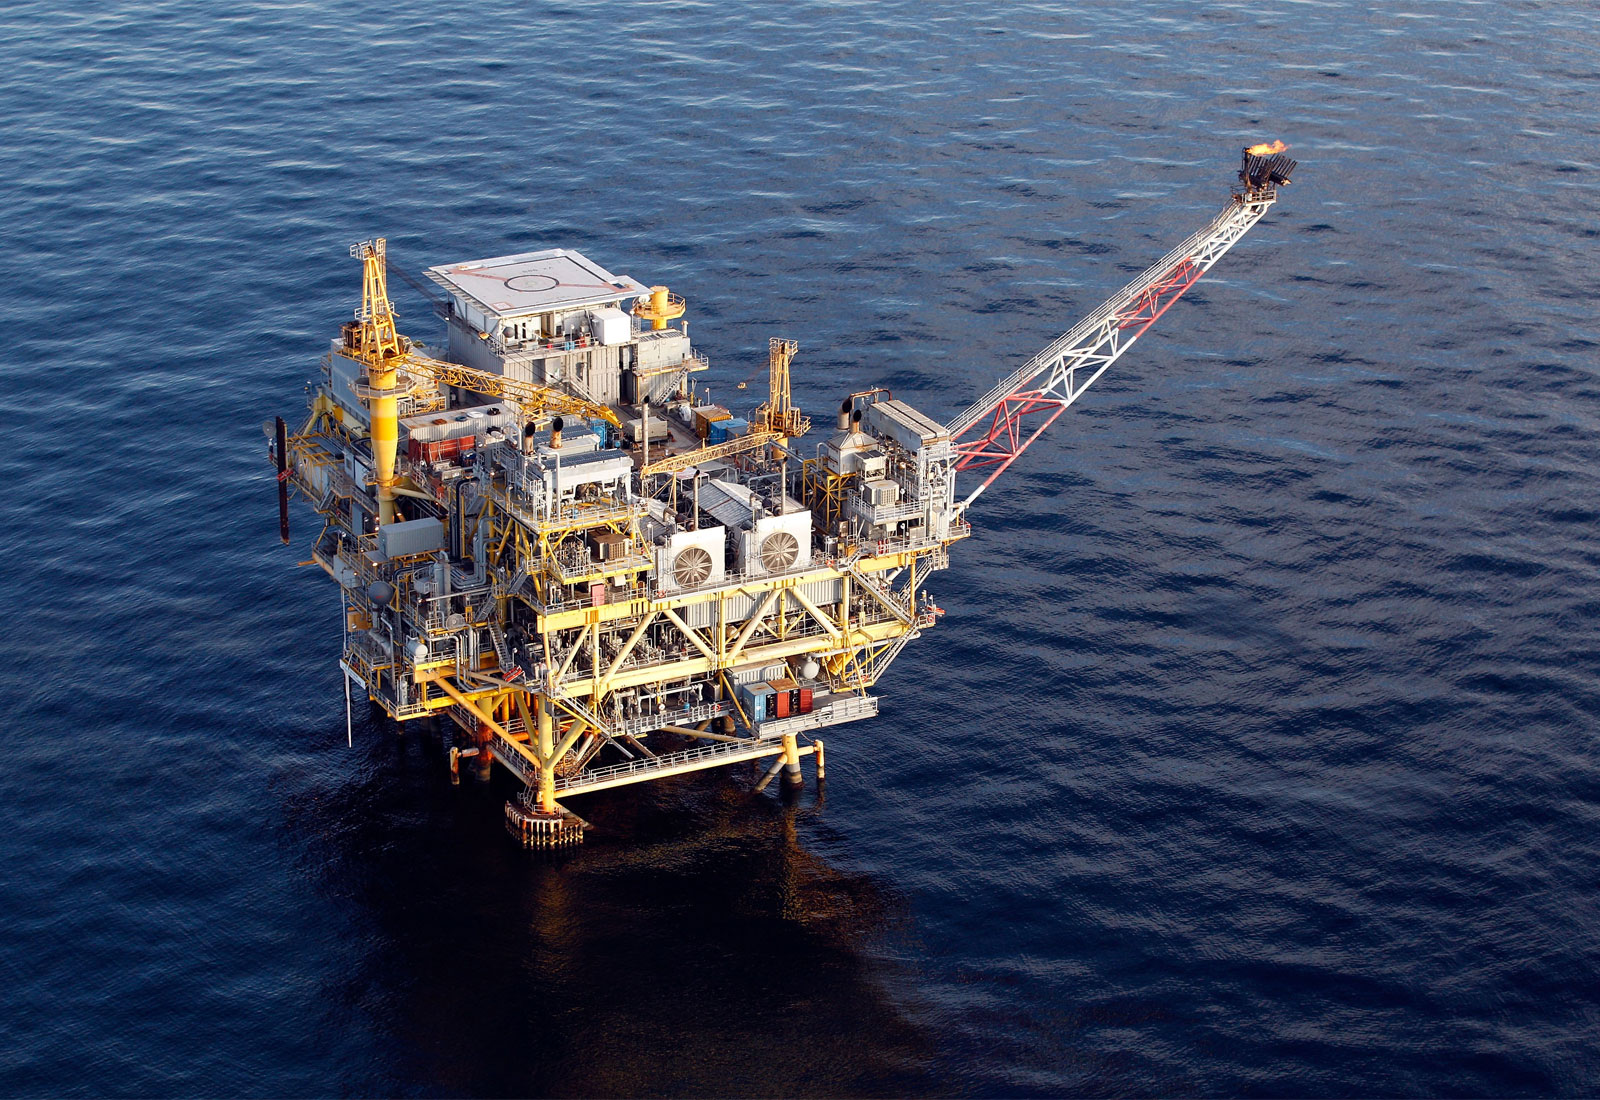 Aerial view of an oil rig in the ocean